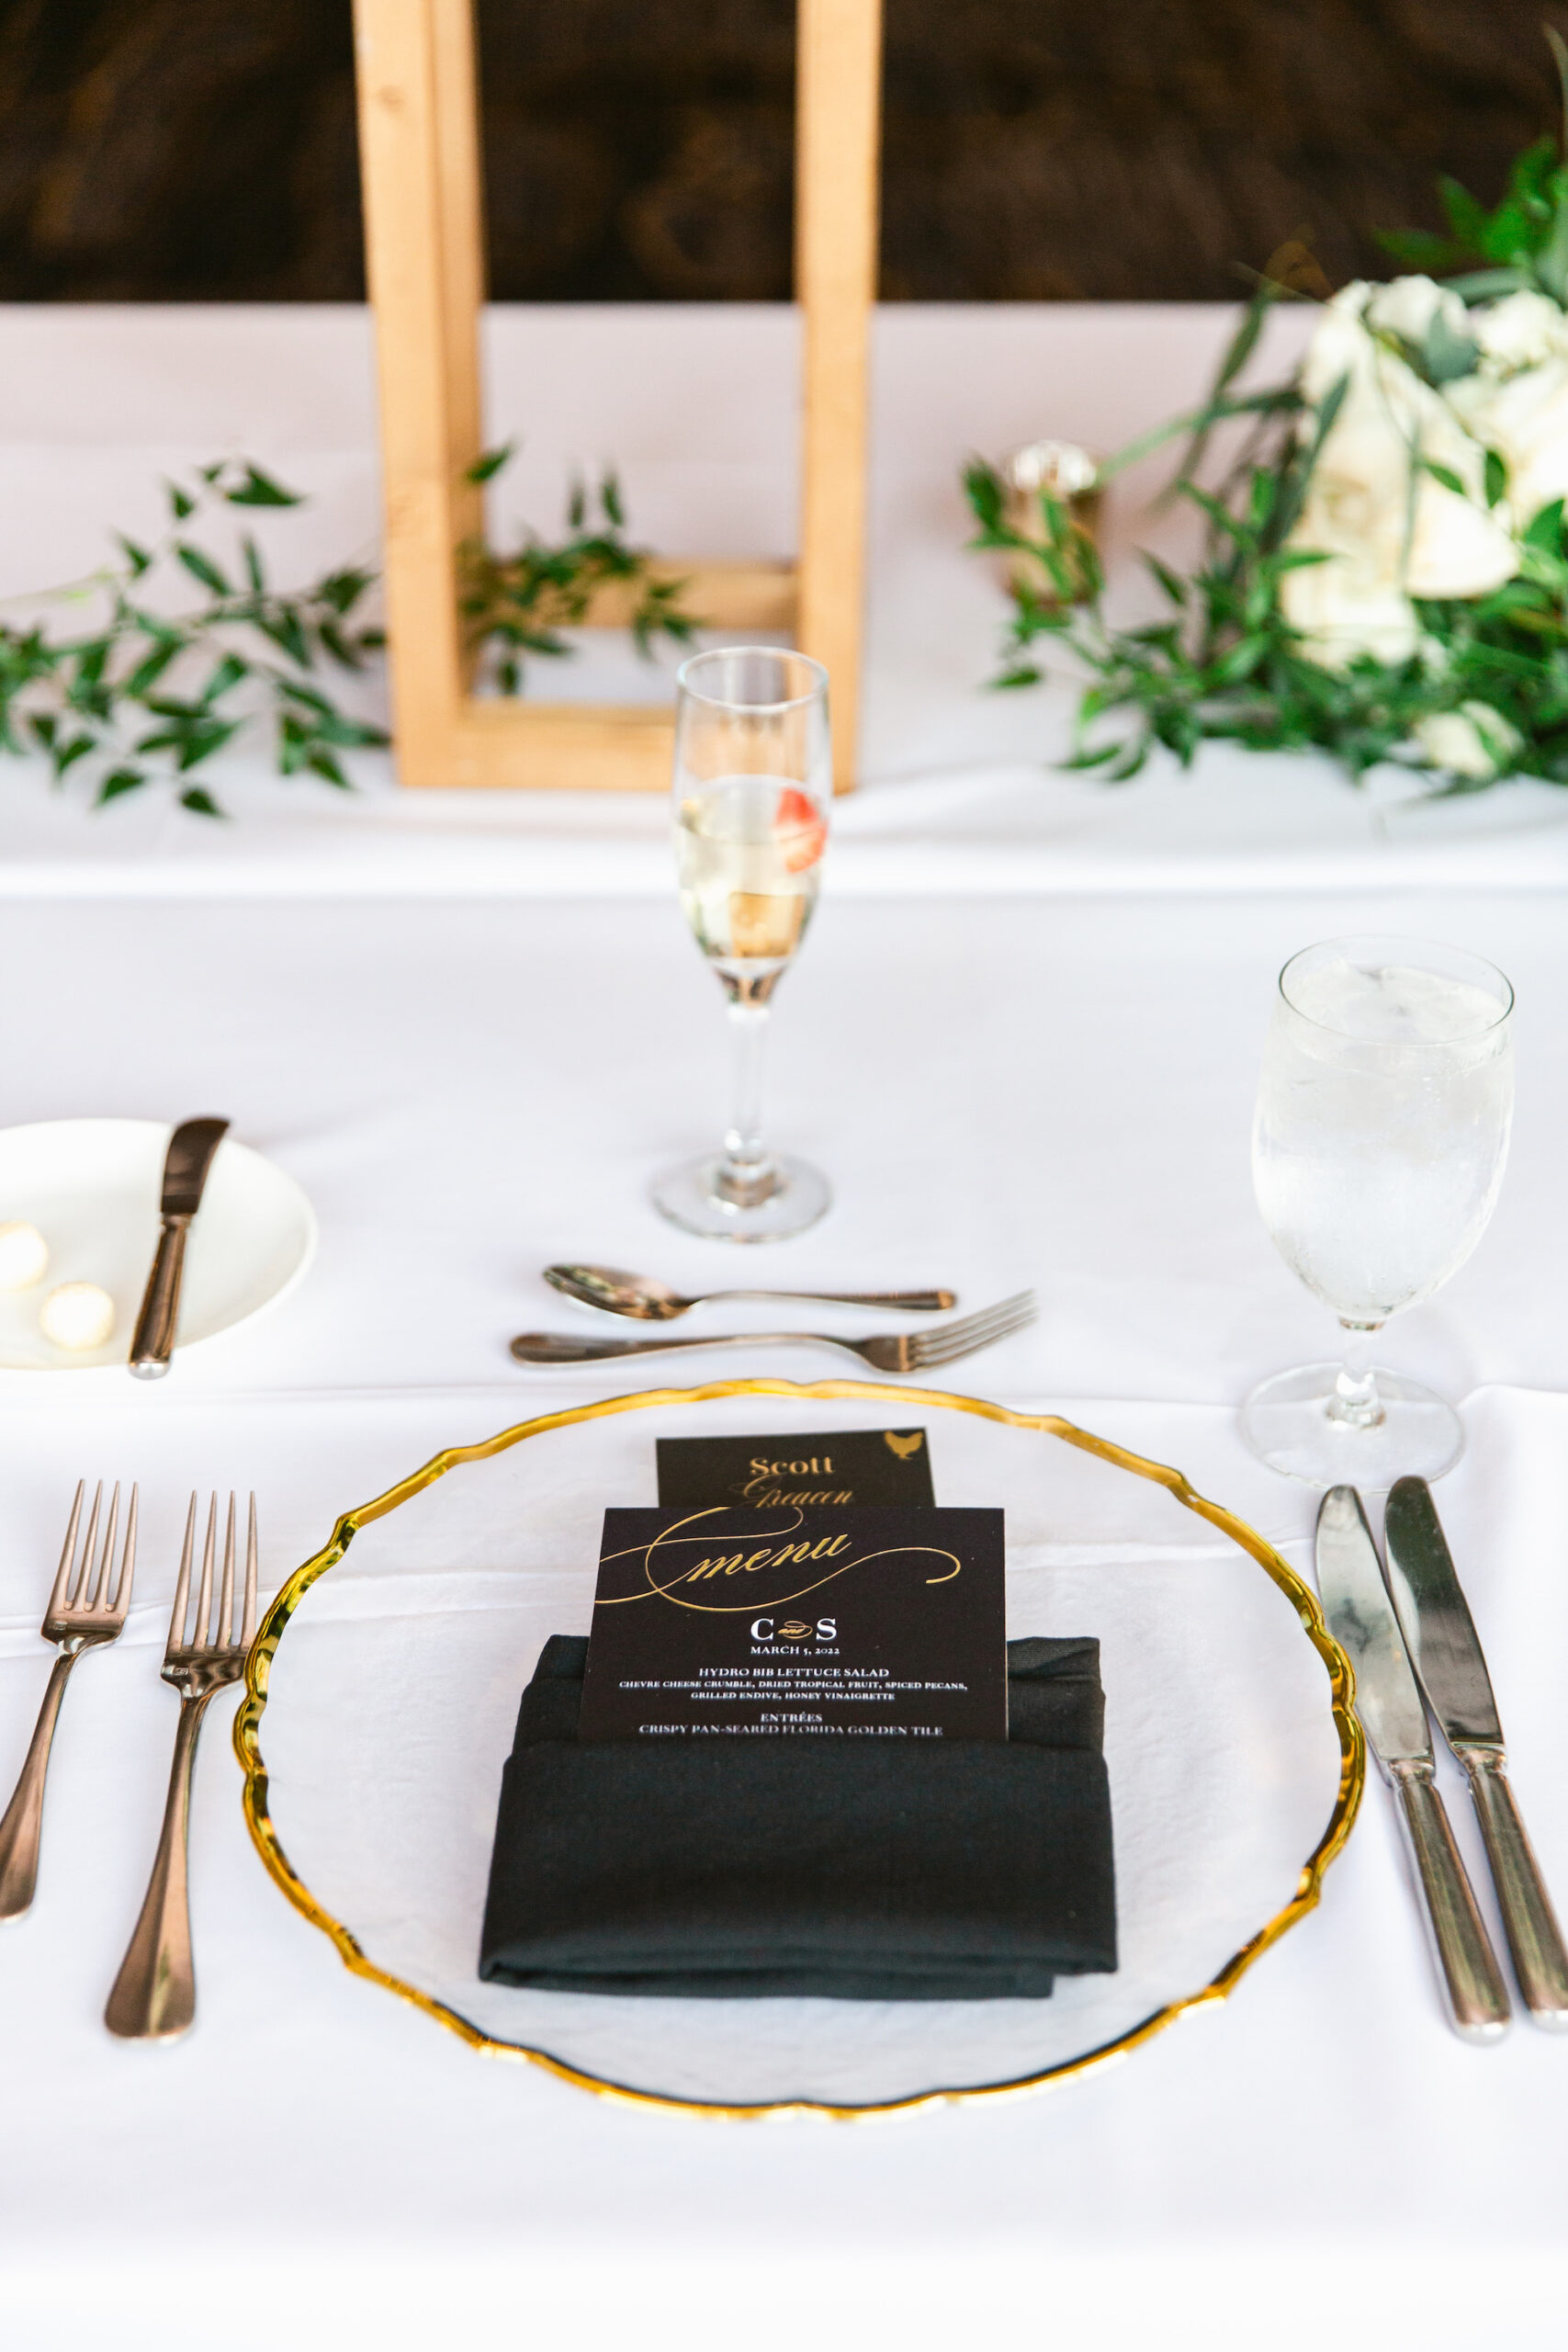 Classic Black White and Gold Wedding Reception Decor Inspiration Table Setting with Black Linen, Gold Rim Chargers, White Tablecloth | Tampa Bay Decor Kate Ryan Event Rentals